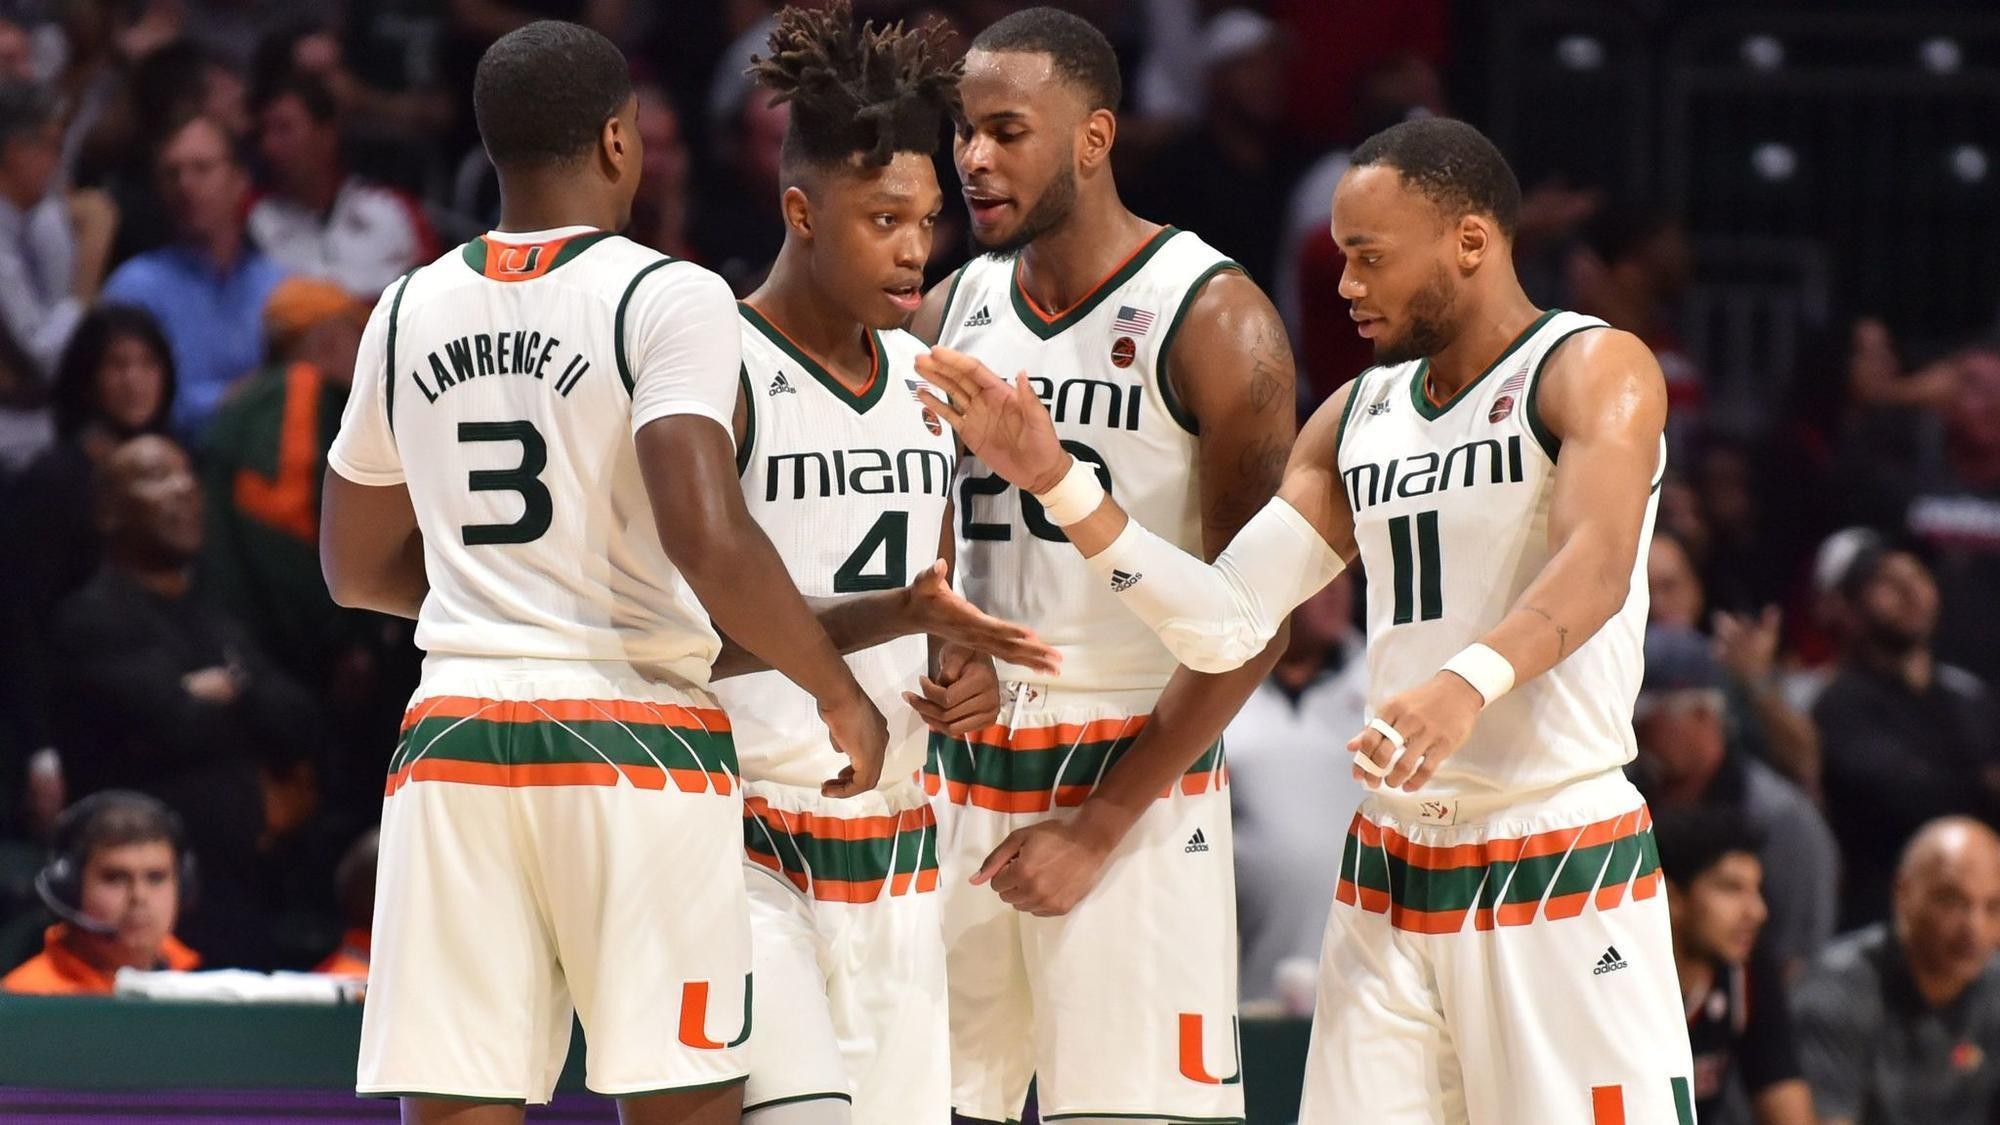 Hurricanes men's basketball team looking to ride momentum into game at